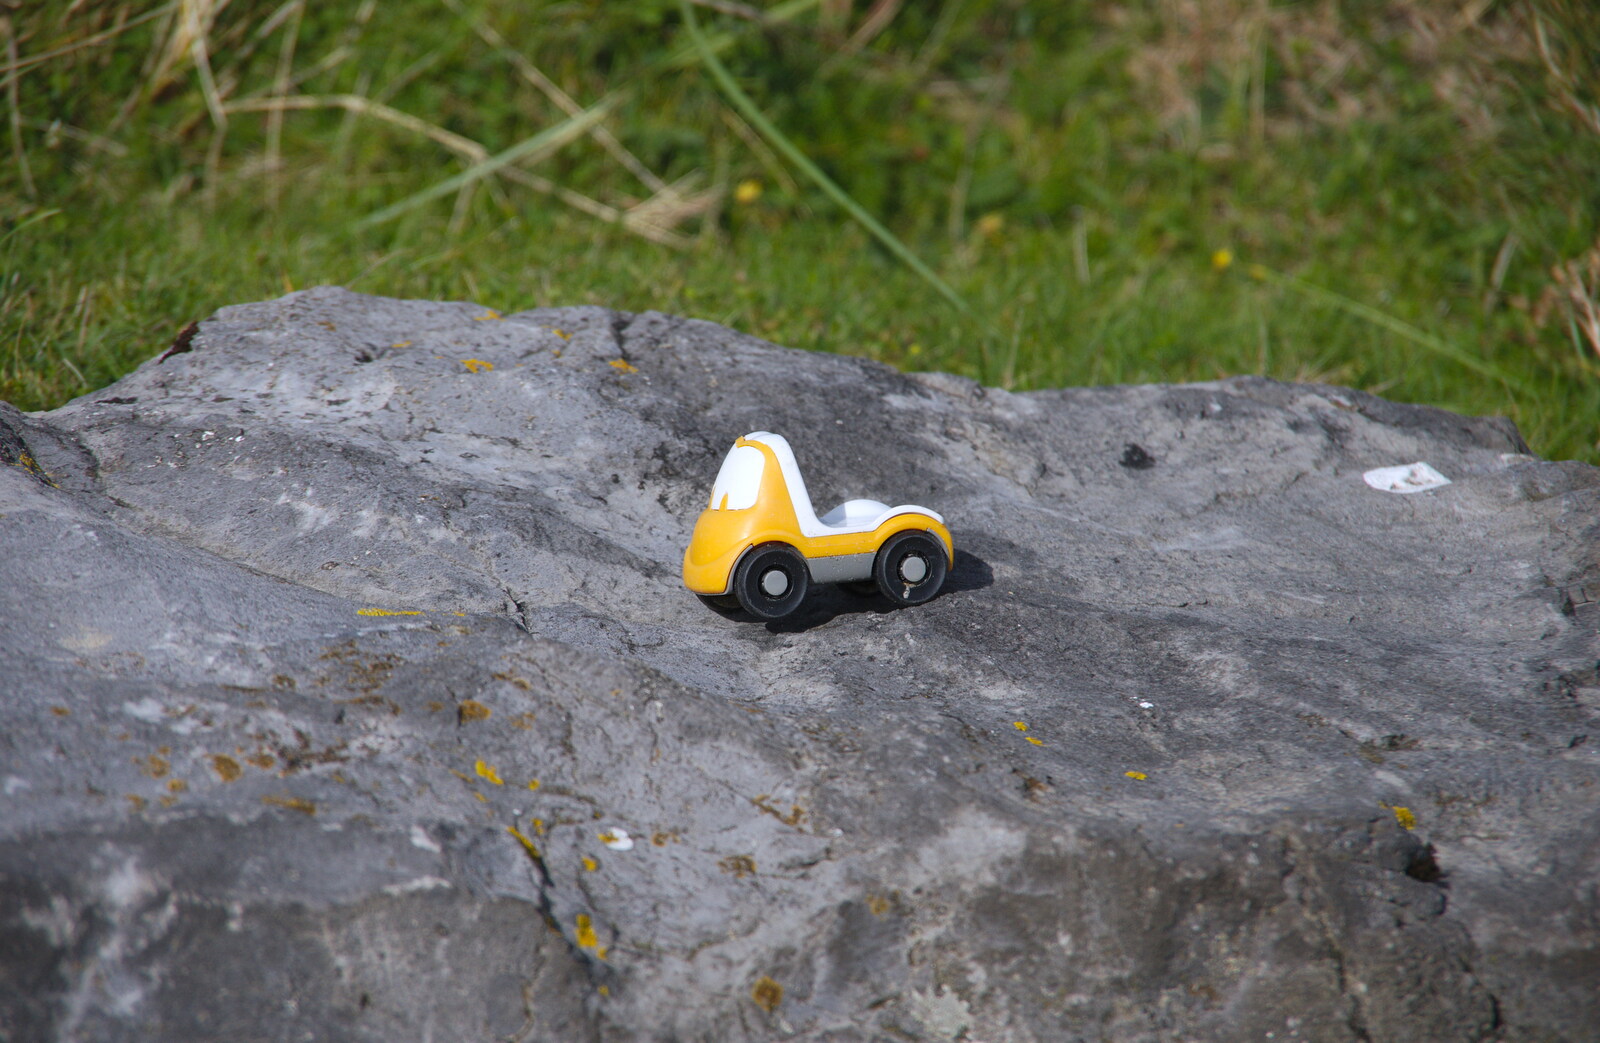 A discarded toy on a rock from Mullaghmore Beach and Marble Arch Caves, Sligo and Fermanagh, Ireland - 19th August 2019